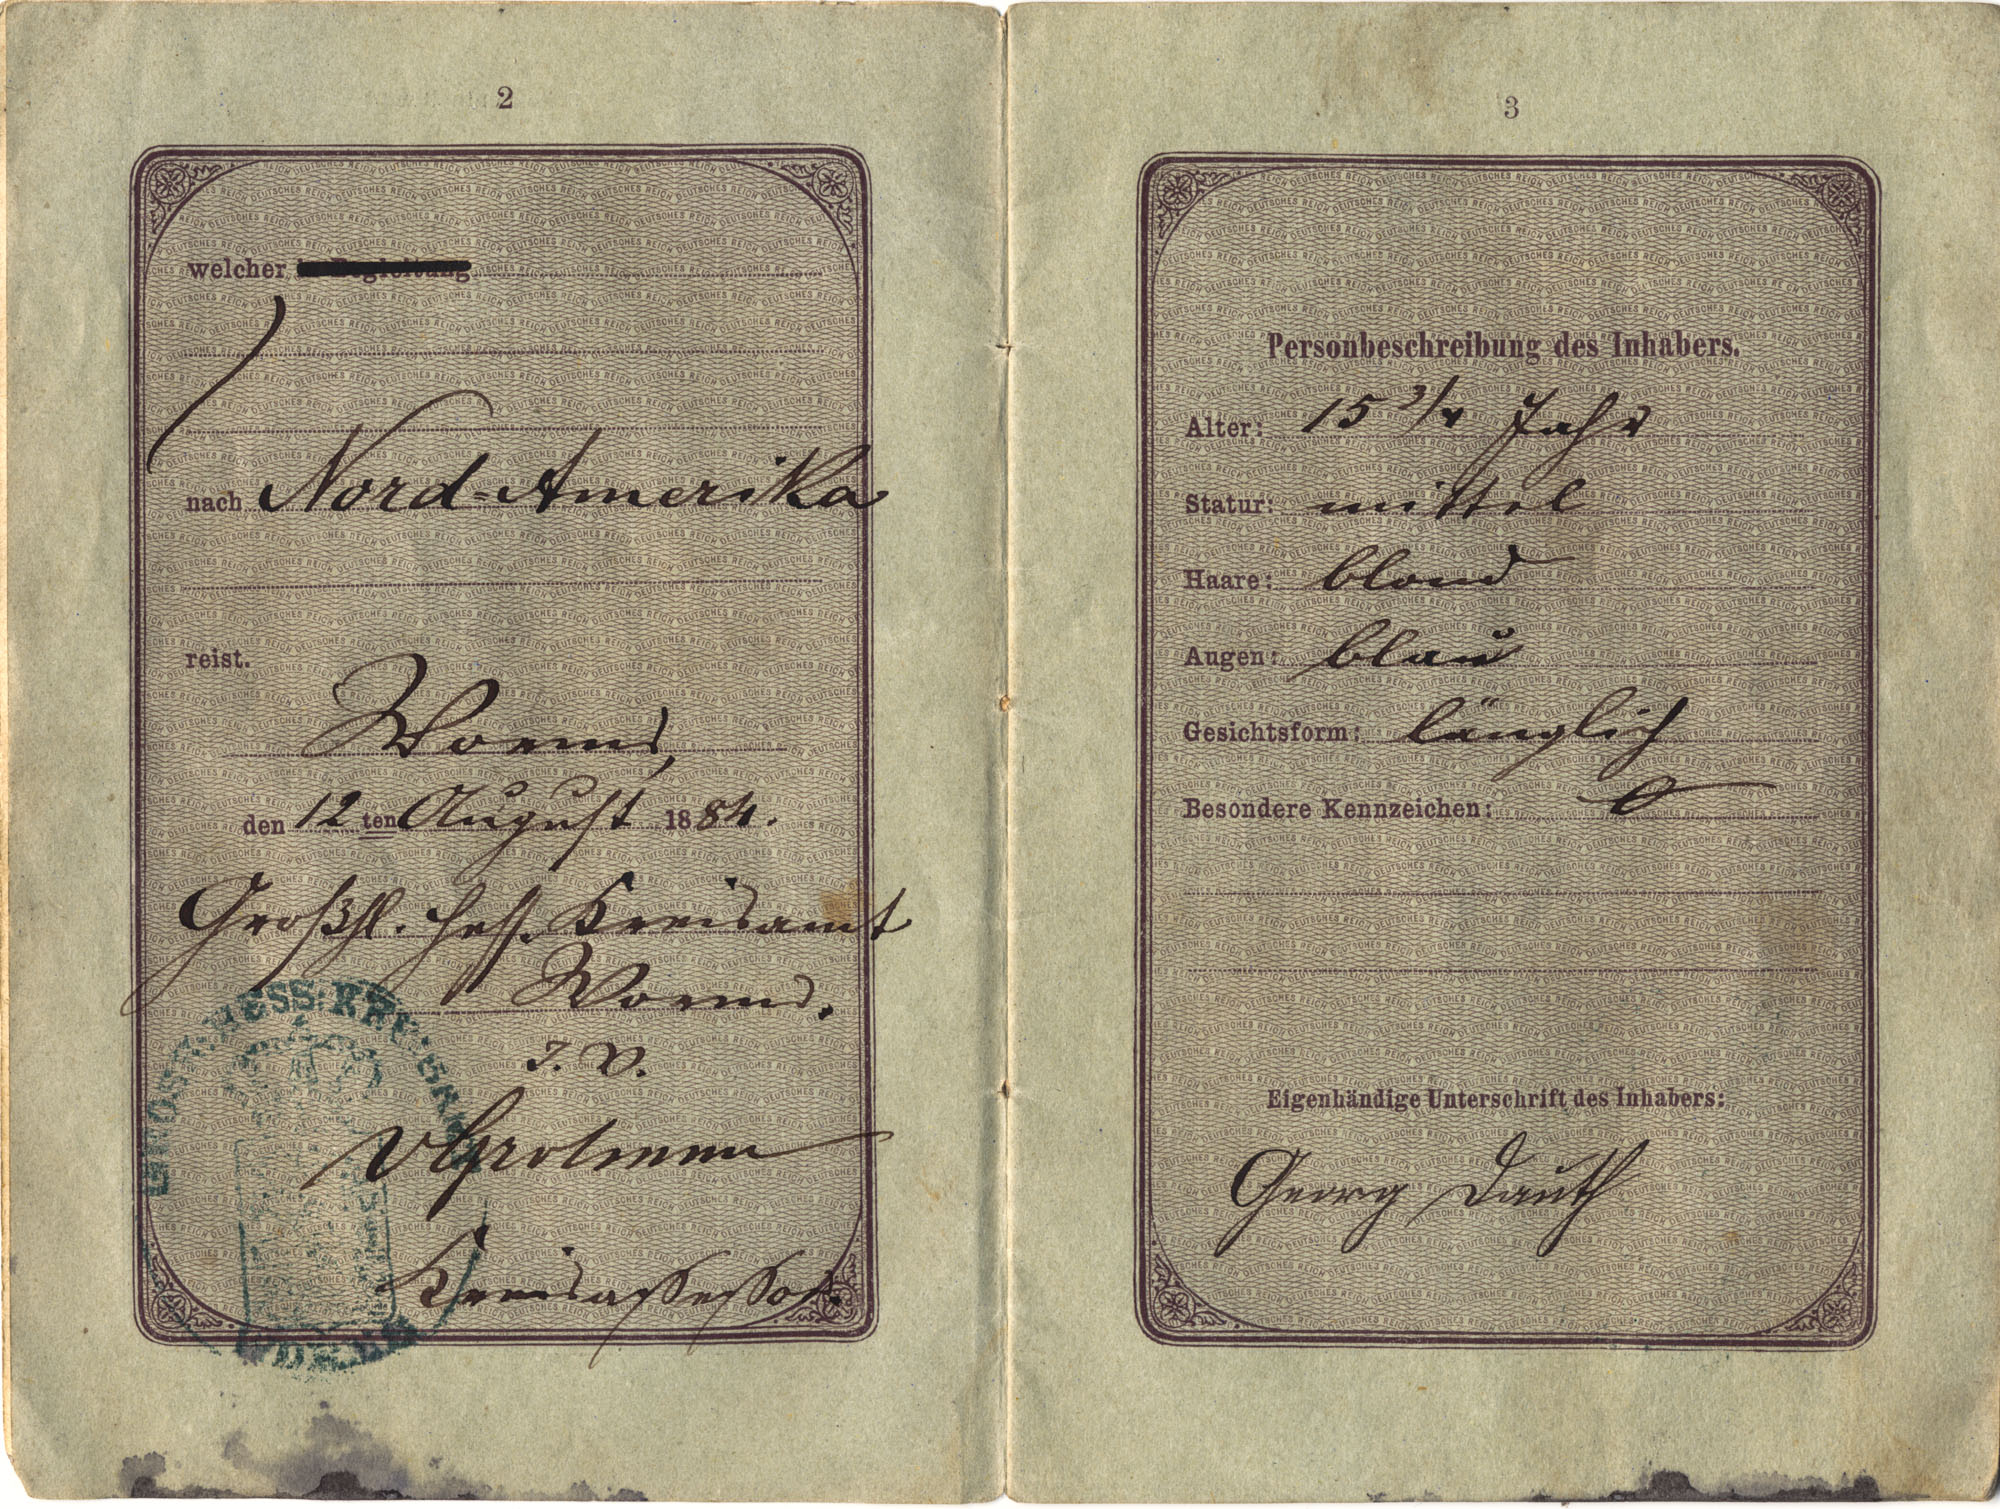 Dauth Family Archive - 1884-08-12 - George Dauth's German Passport - Pages 2-3